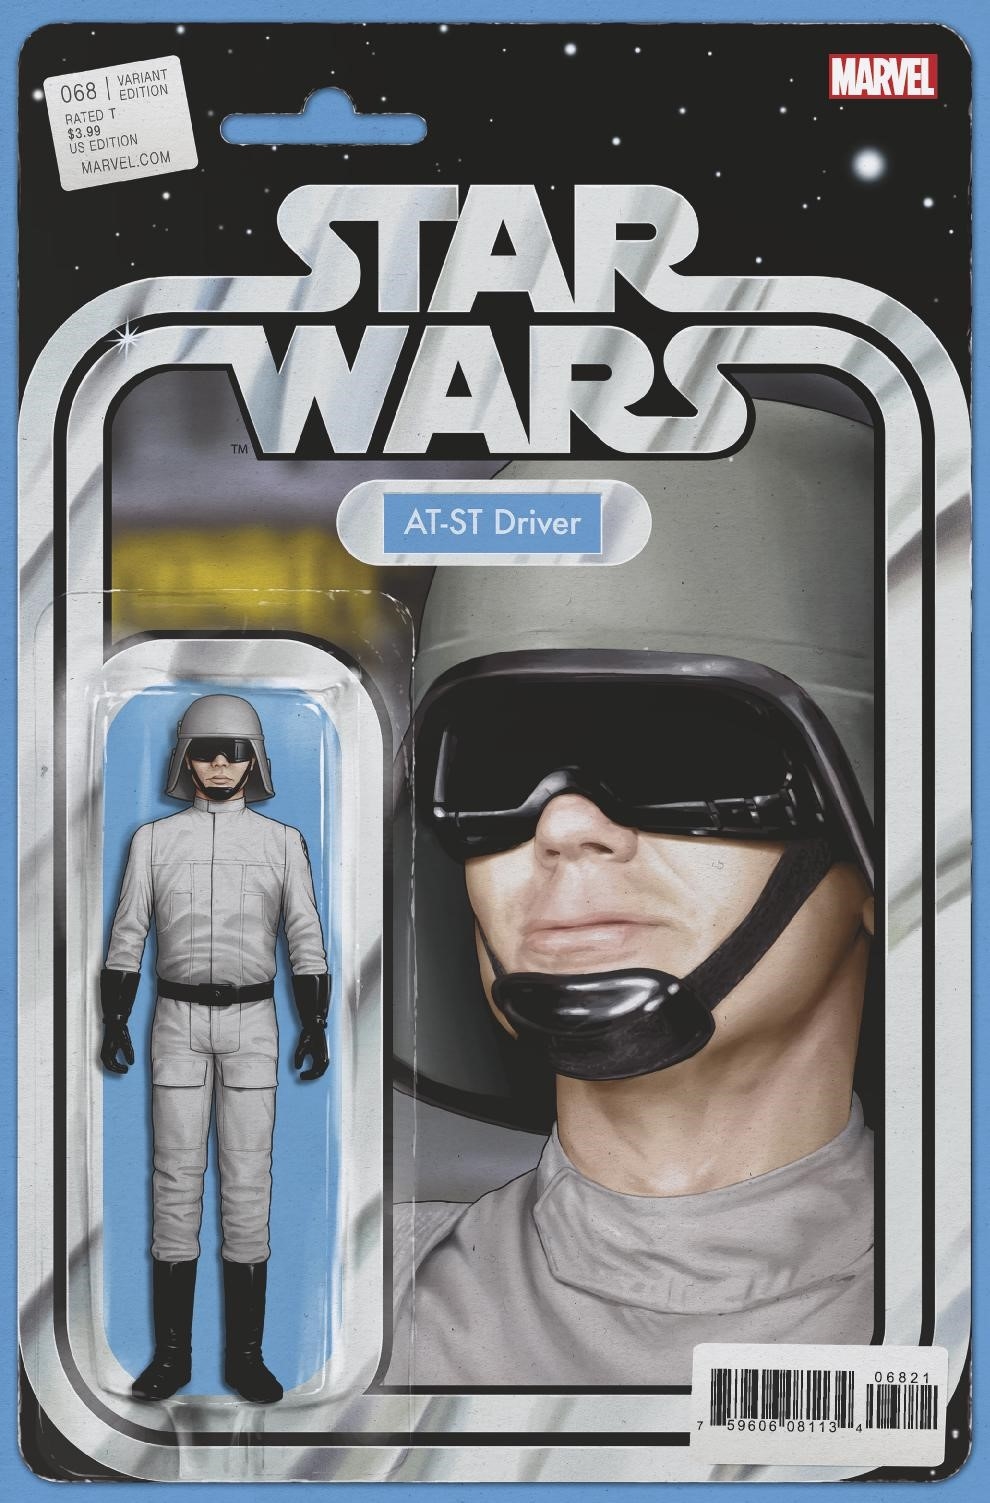 Star Wars #68 (Action Figure Variant Cover) (10.07.2019)